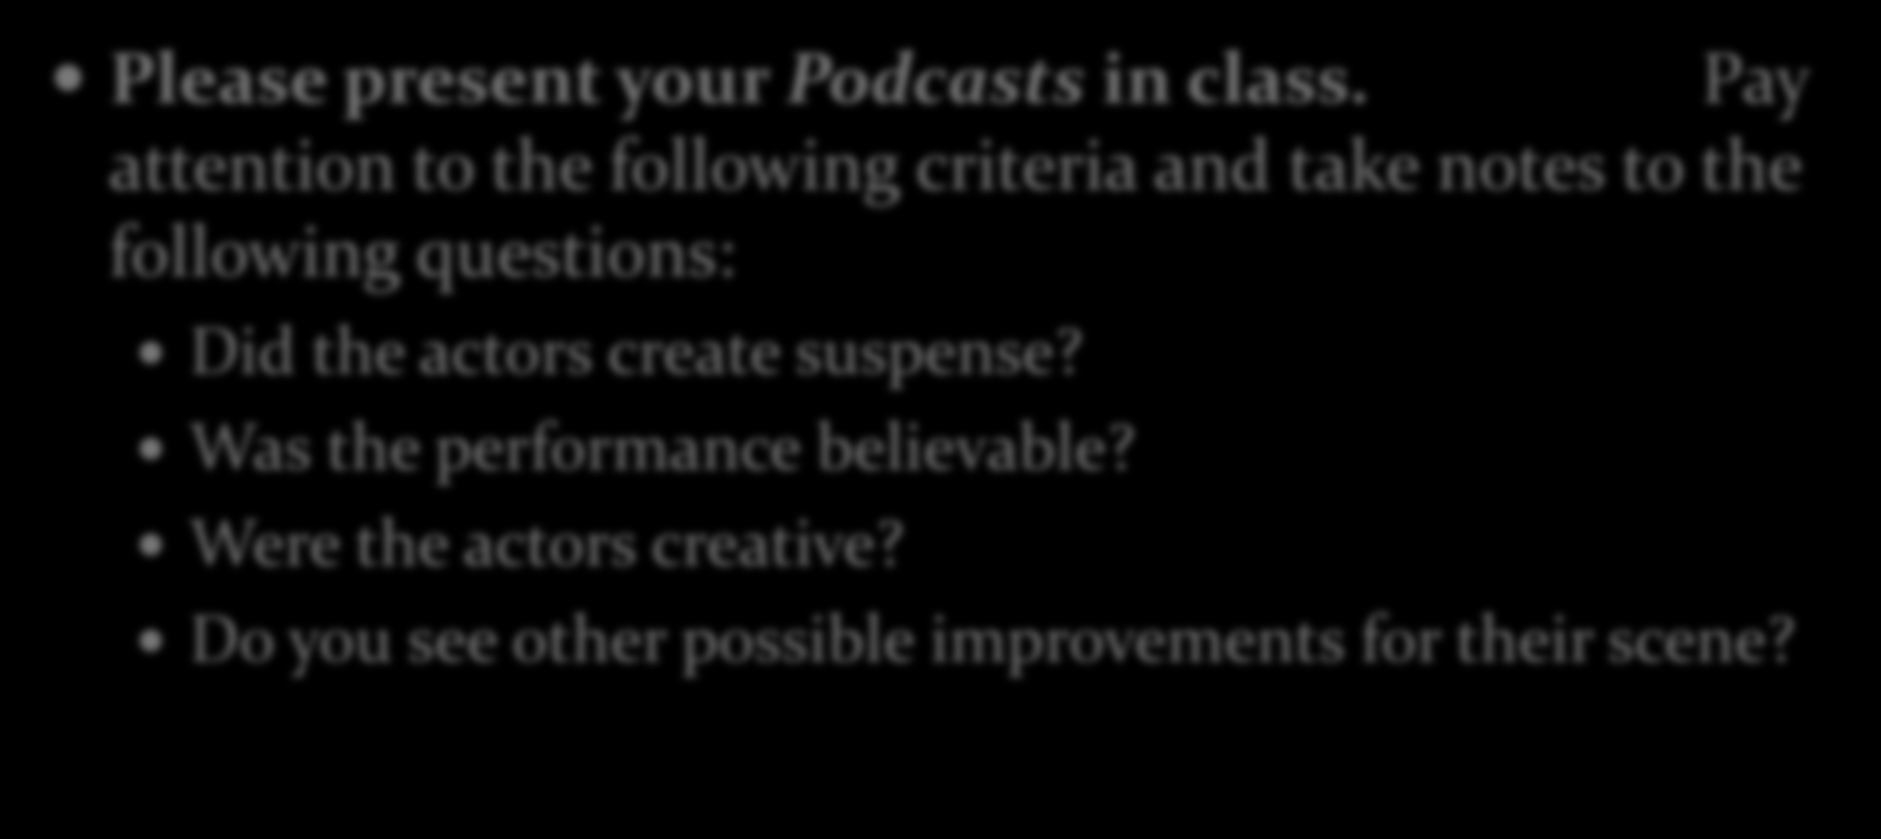 Task 2 Please present your Podcasts in class.